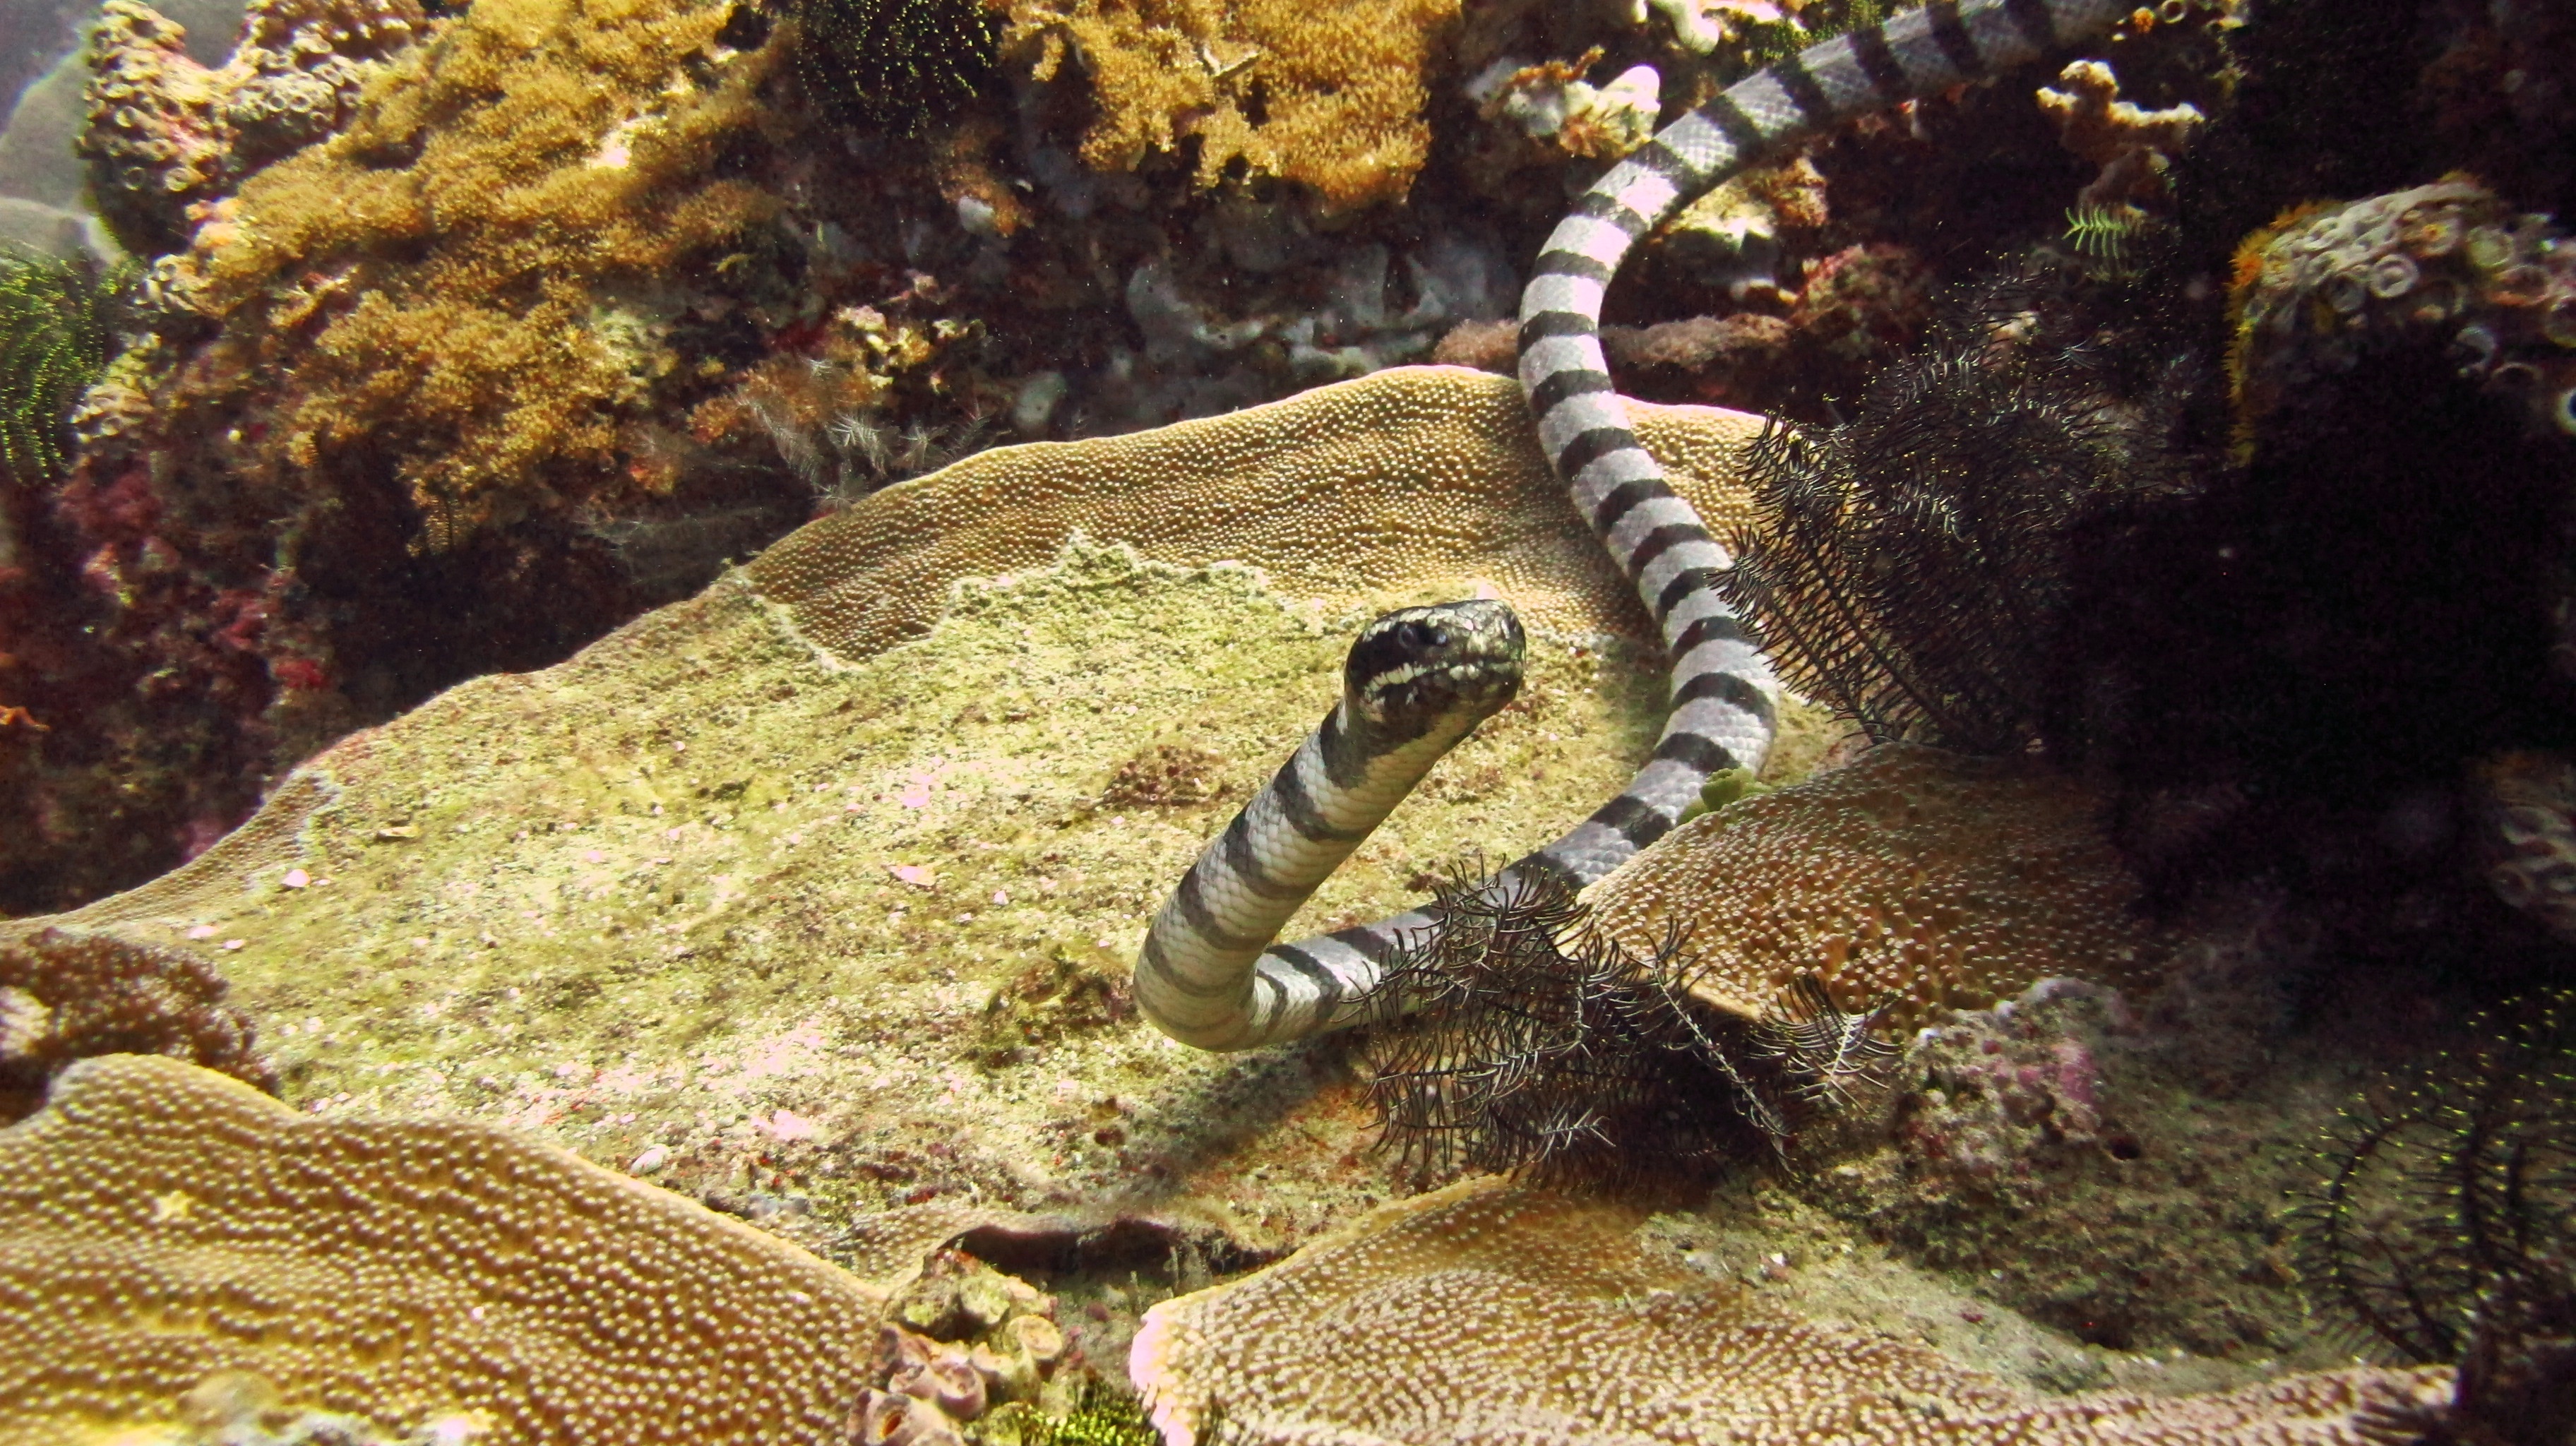 umm, is that a sea snake?